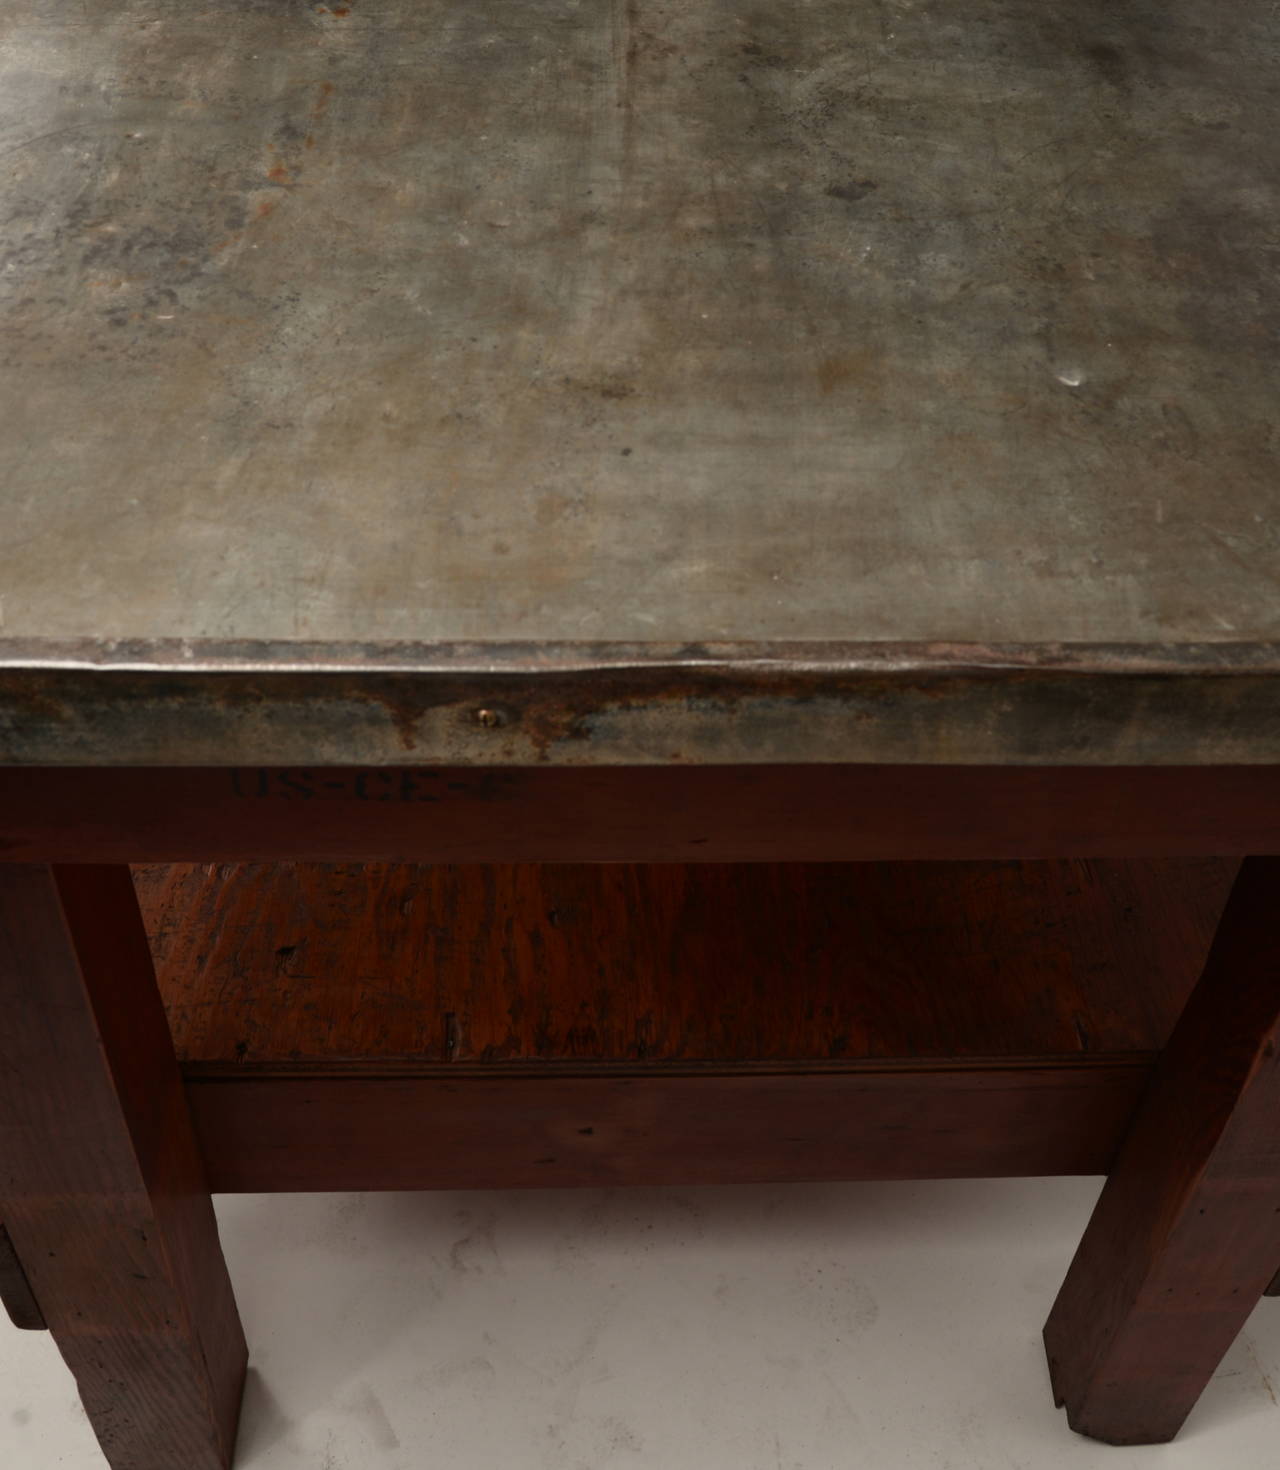 Vintage army corps of engineers table. The base is old growth Douglas fir and the top is galvanized steel the has a wonderful patina. This has been thoroughly cleaned and waxed.